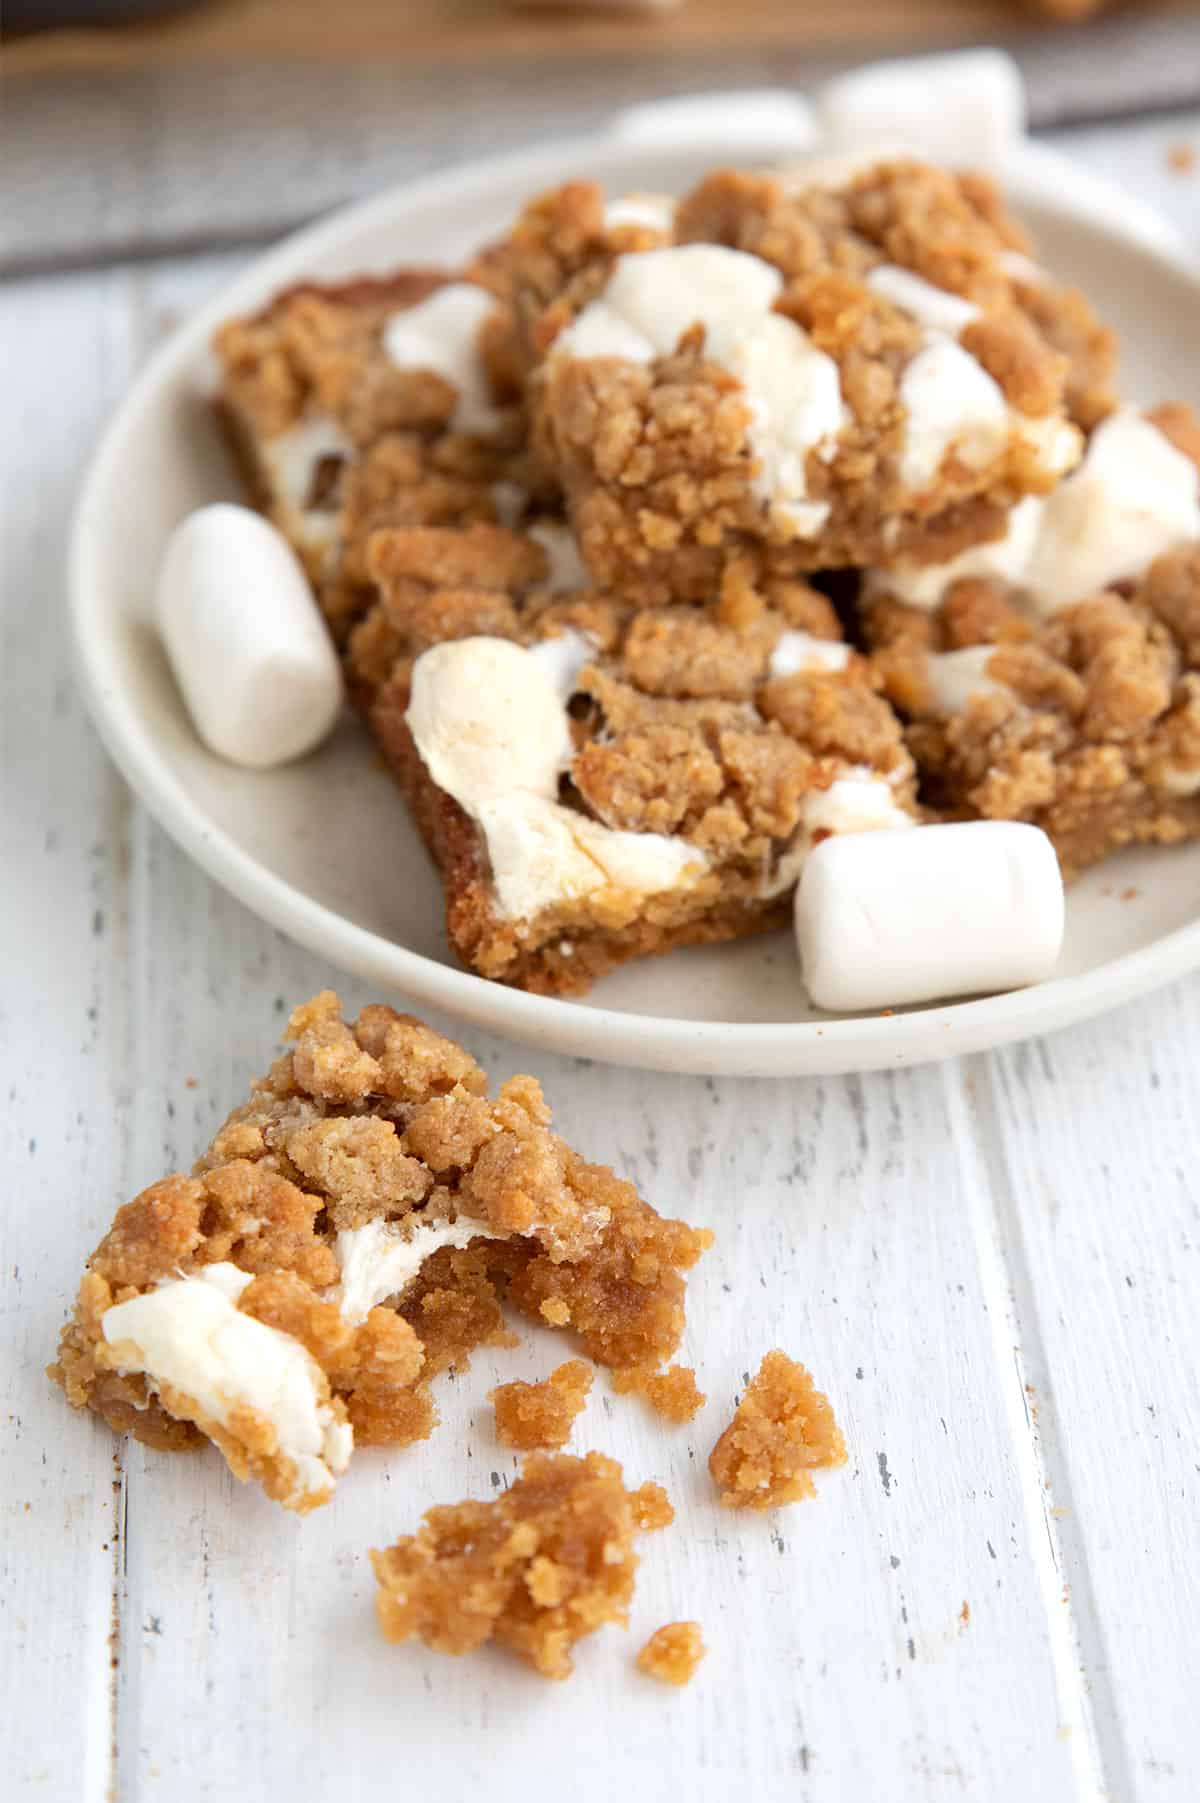 A Keto Fluffernutter Bar with a bite taken out of it on a white wooden table.